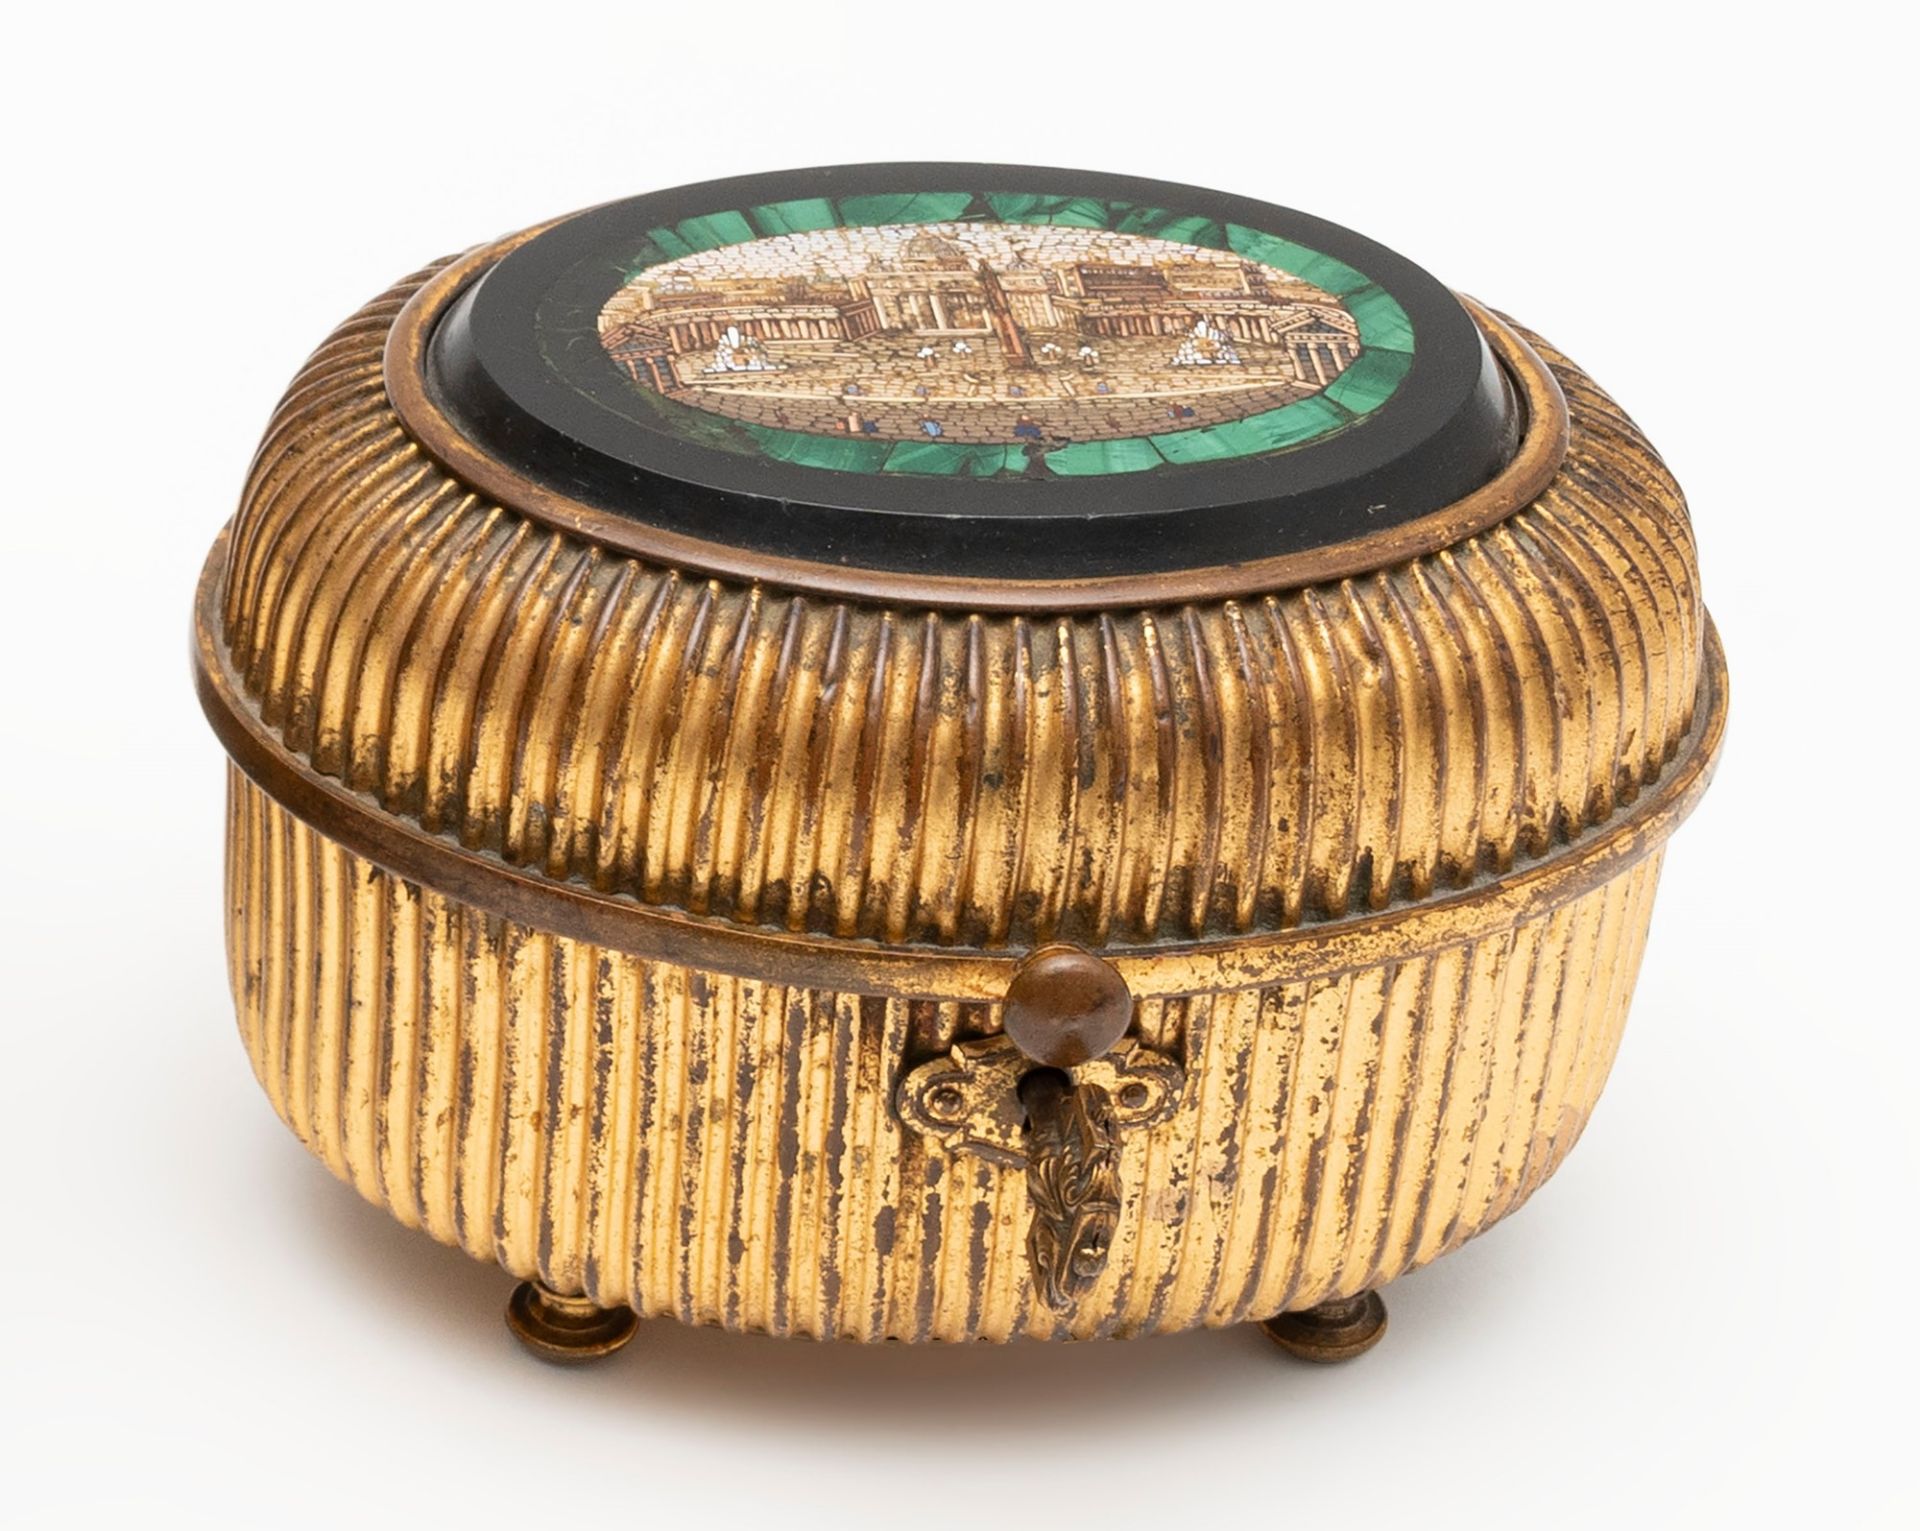 Gilded bronze box with lid in black Belgian marble, malachite and micromosaic depicting St. Peter's